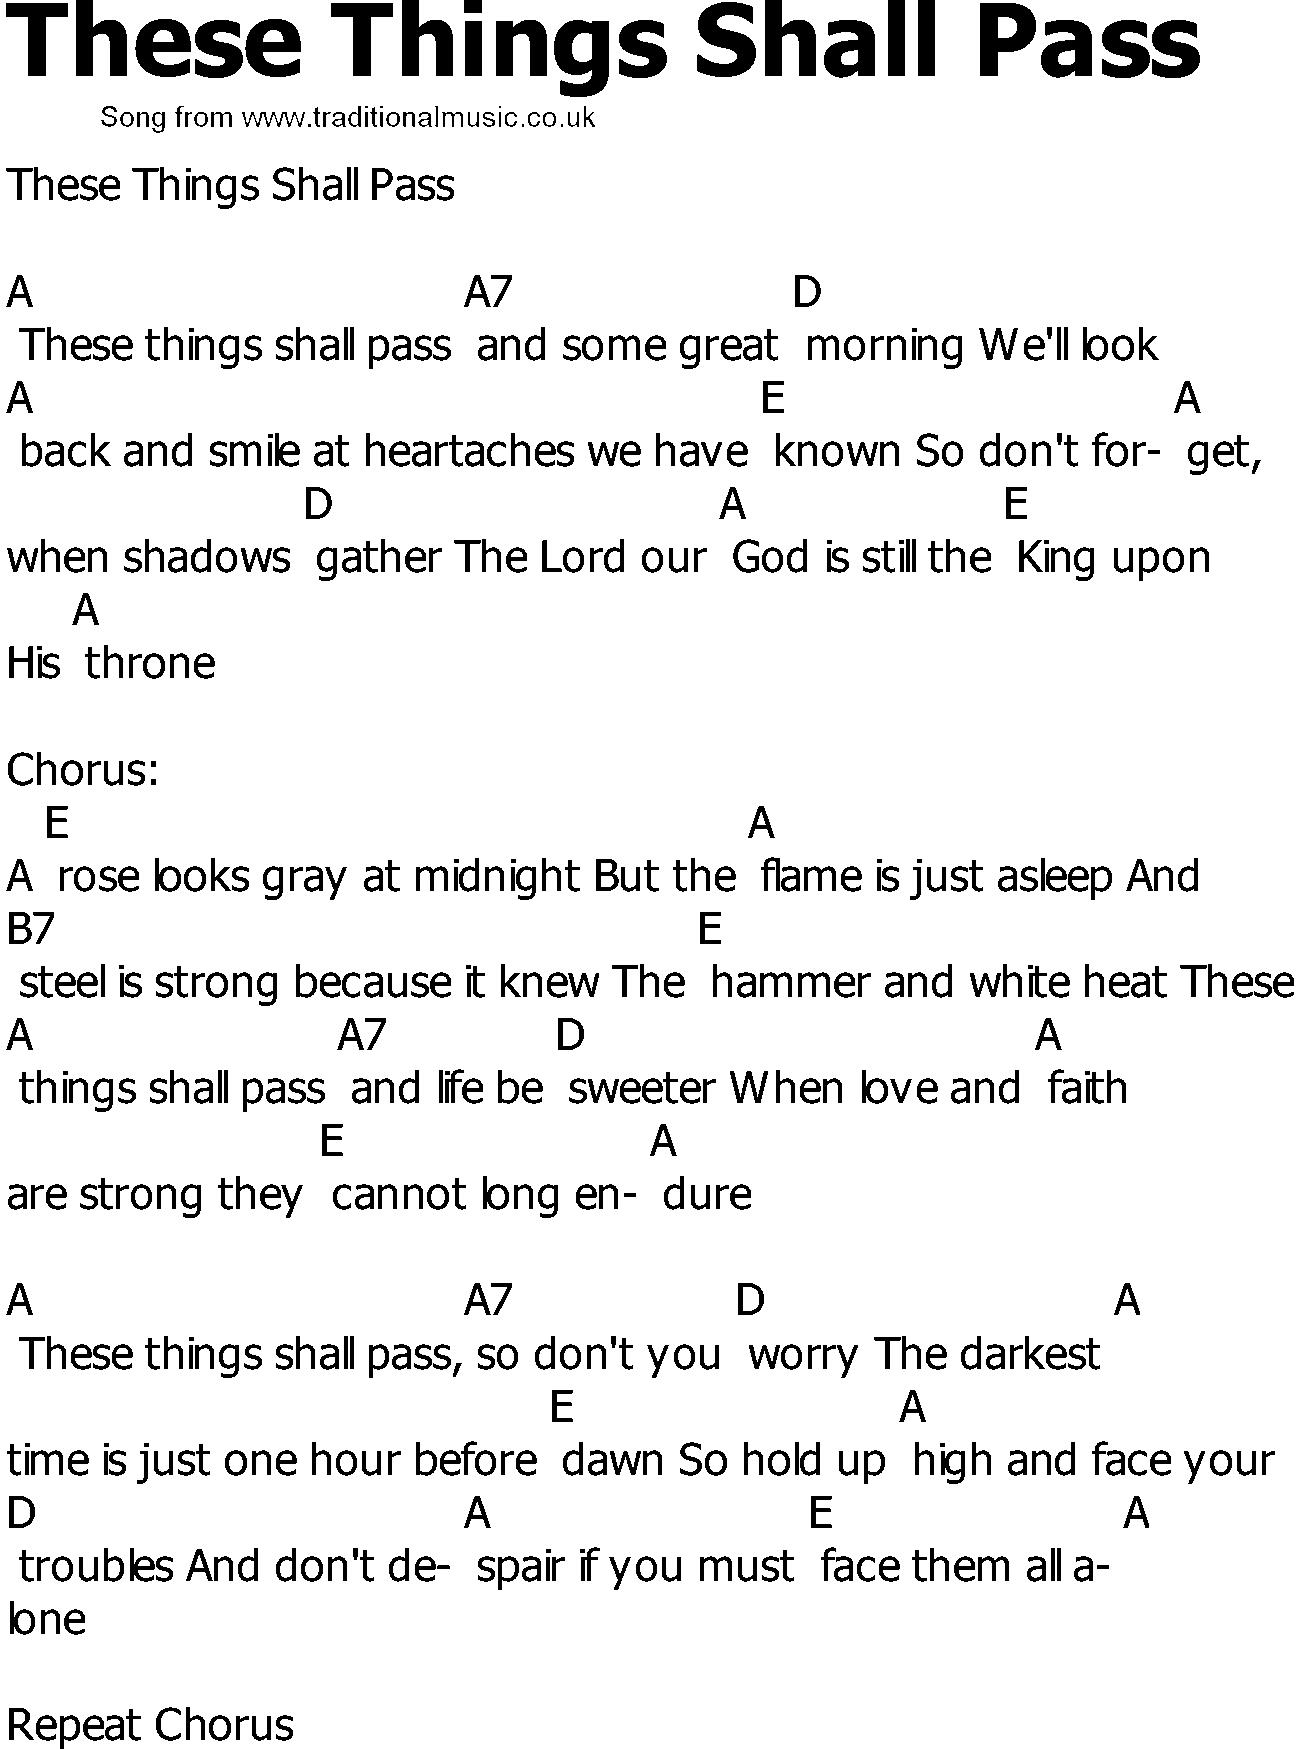 Old Country song lyrics with chords - These Things Shall Pass